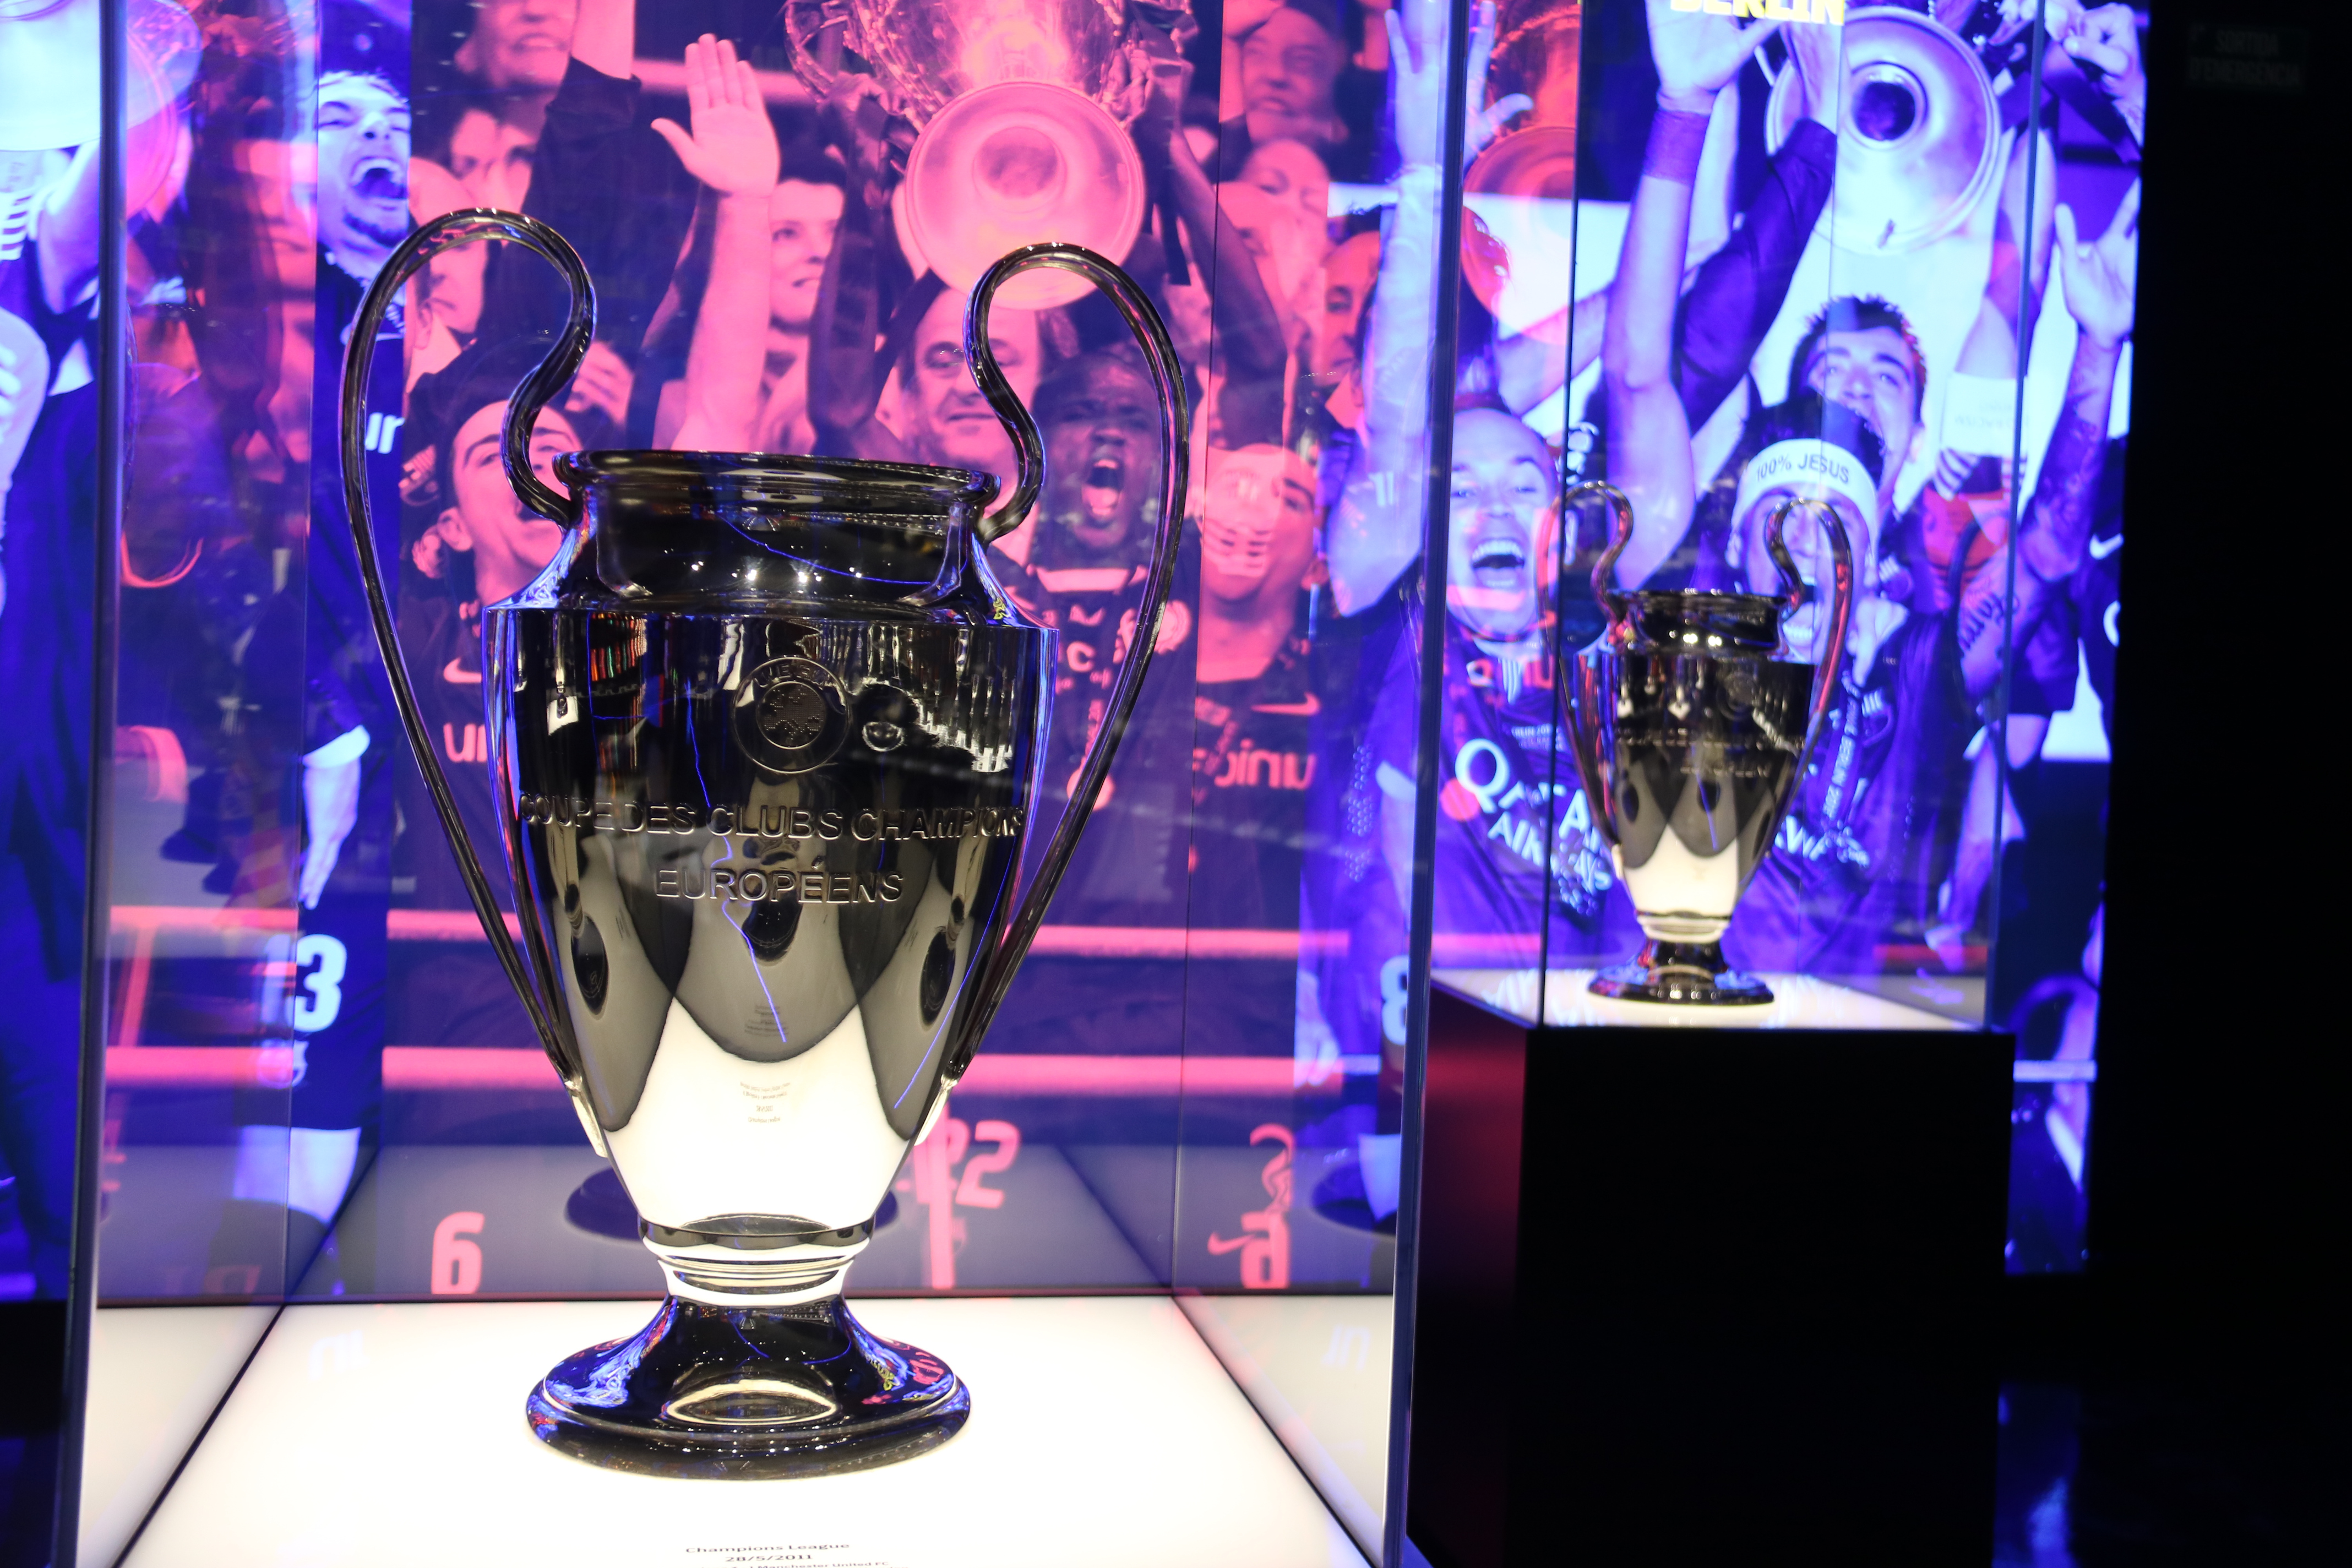 FC Barcelona's two UEFA Champions League trophies in the museum